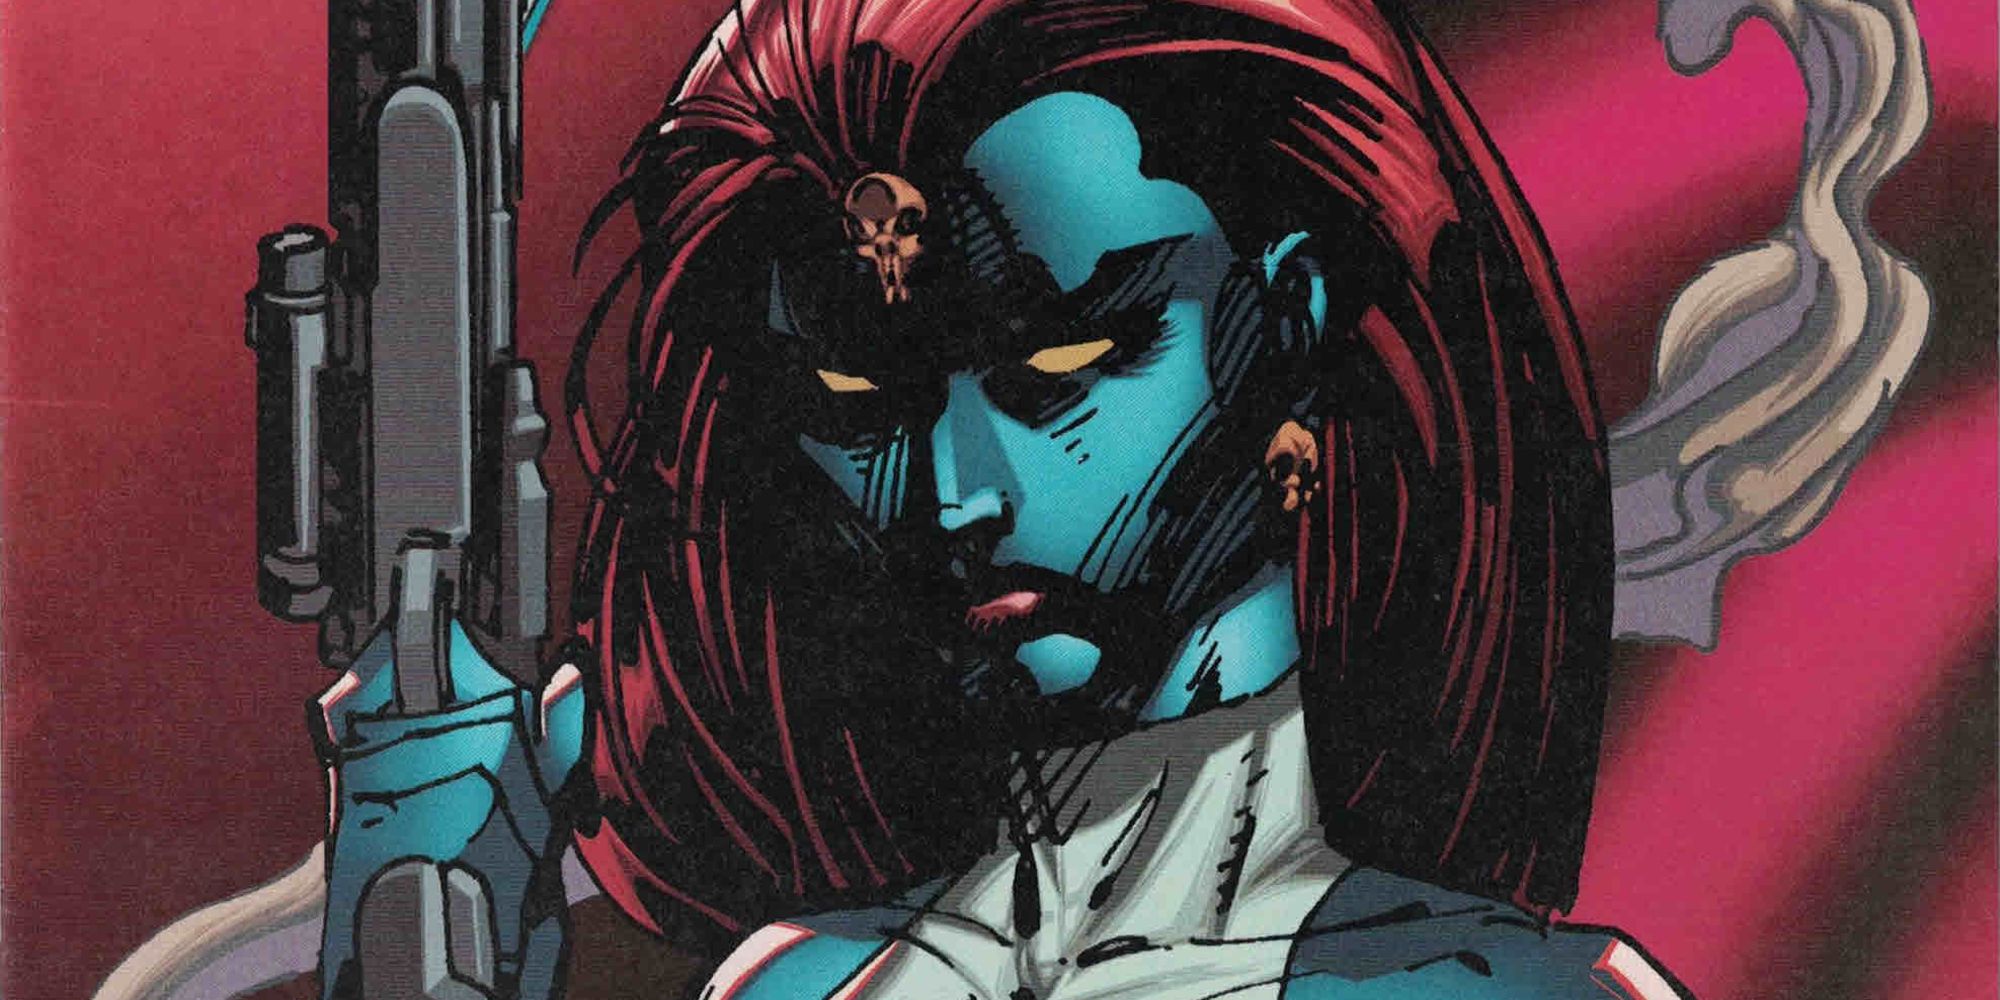 The character Mystique from the X-Men series.